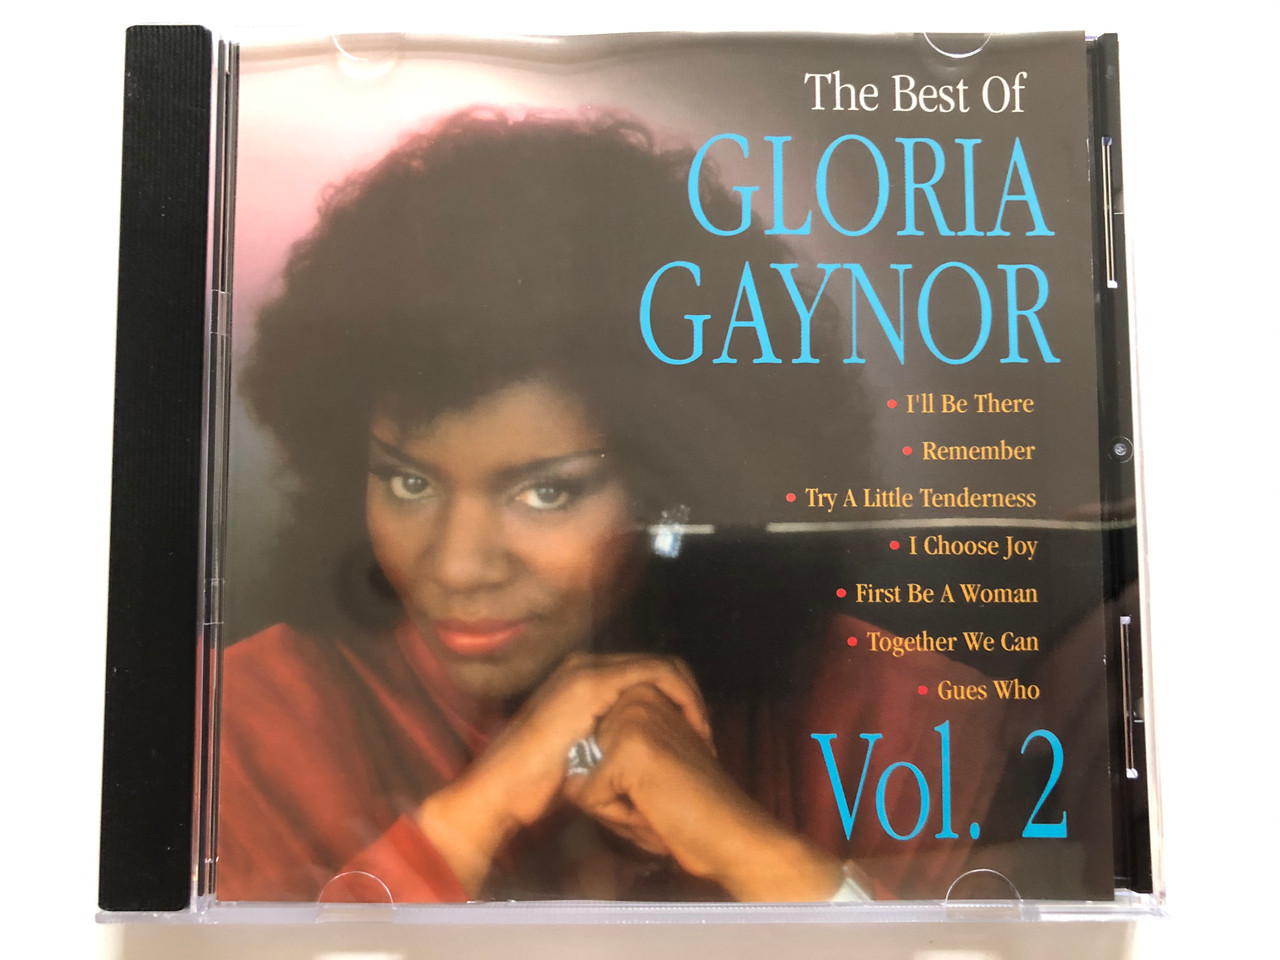 https://cdn10.bigcommerce.com/s-62bdpkt7pb/products/30062/images/178382/The_Best_Of_Gloria_Gaynor_-_Vol.2_Ill_Be_There_Rememeber_Try_A_Little_Tenderness_I_Choose_Joy_First_Be_A_Woman_Together_We_Can_Guess_Who_Eurotrend_Audio_CD_Stereo_CD_157_1__61086.1621233593.1280.1280.JPG?c=2&_ga=2.100799617.121704874.1621271157-442397351.1621271157